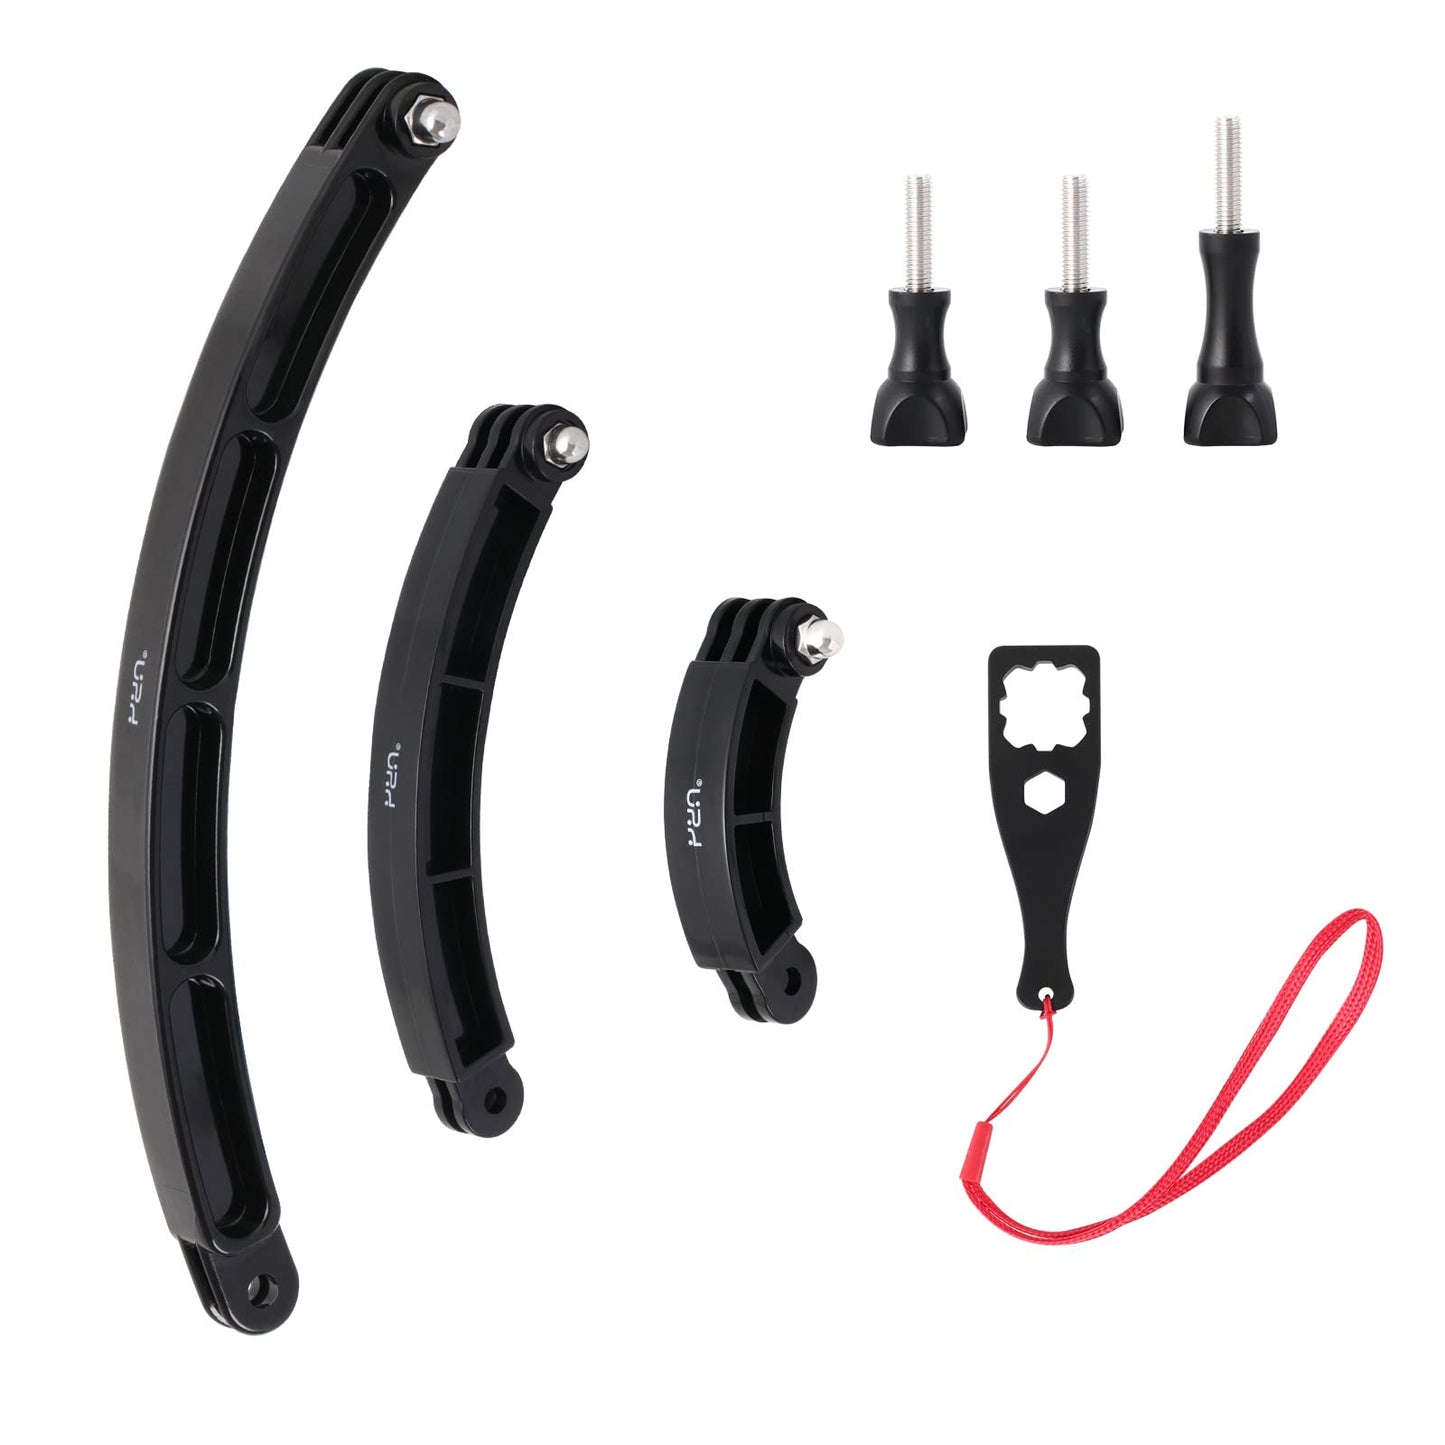 HSU 3 in 1 Curved Extension Arm Kit